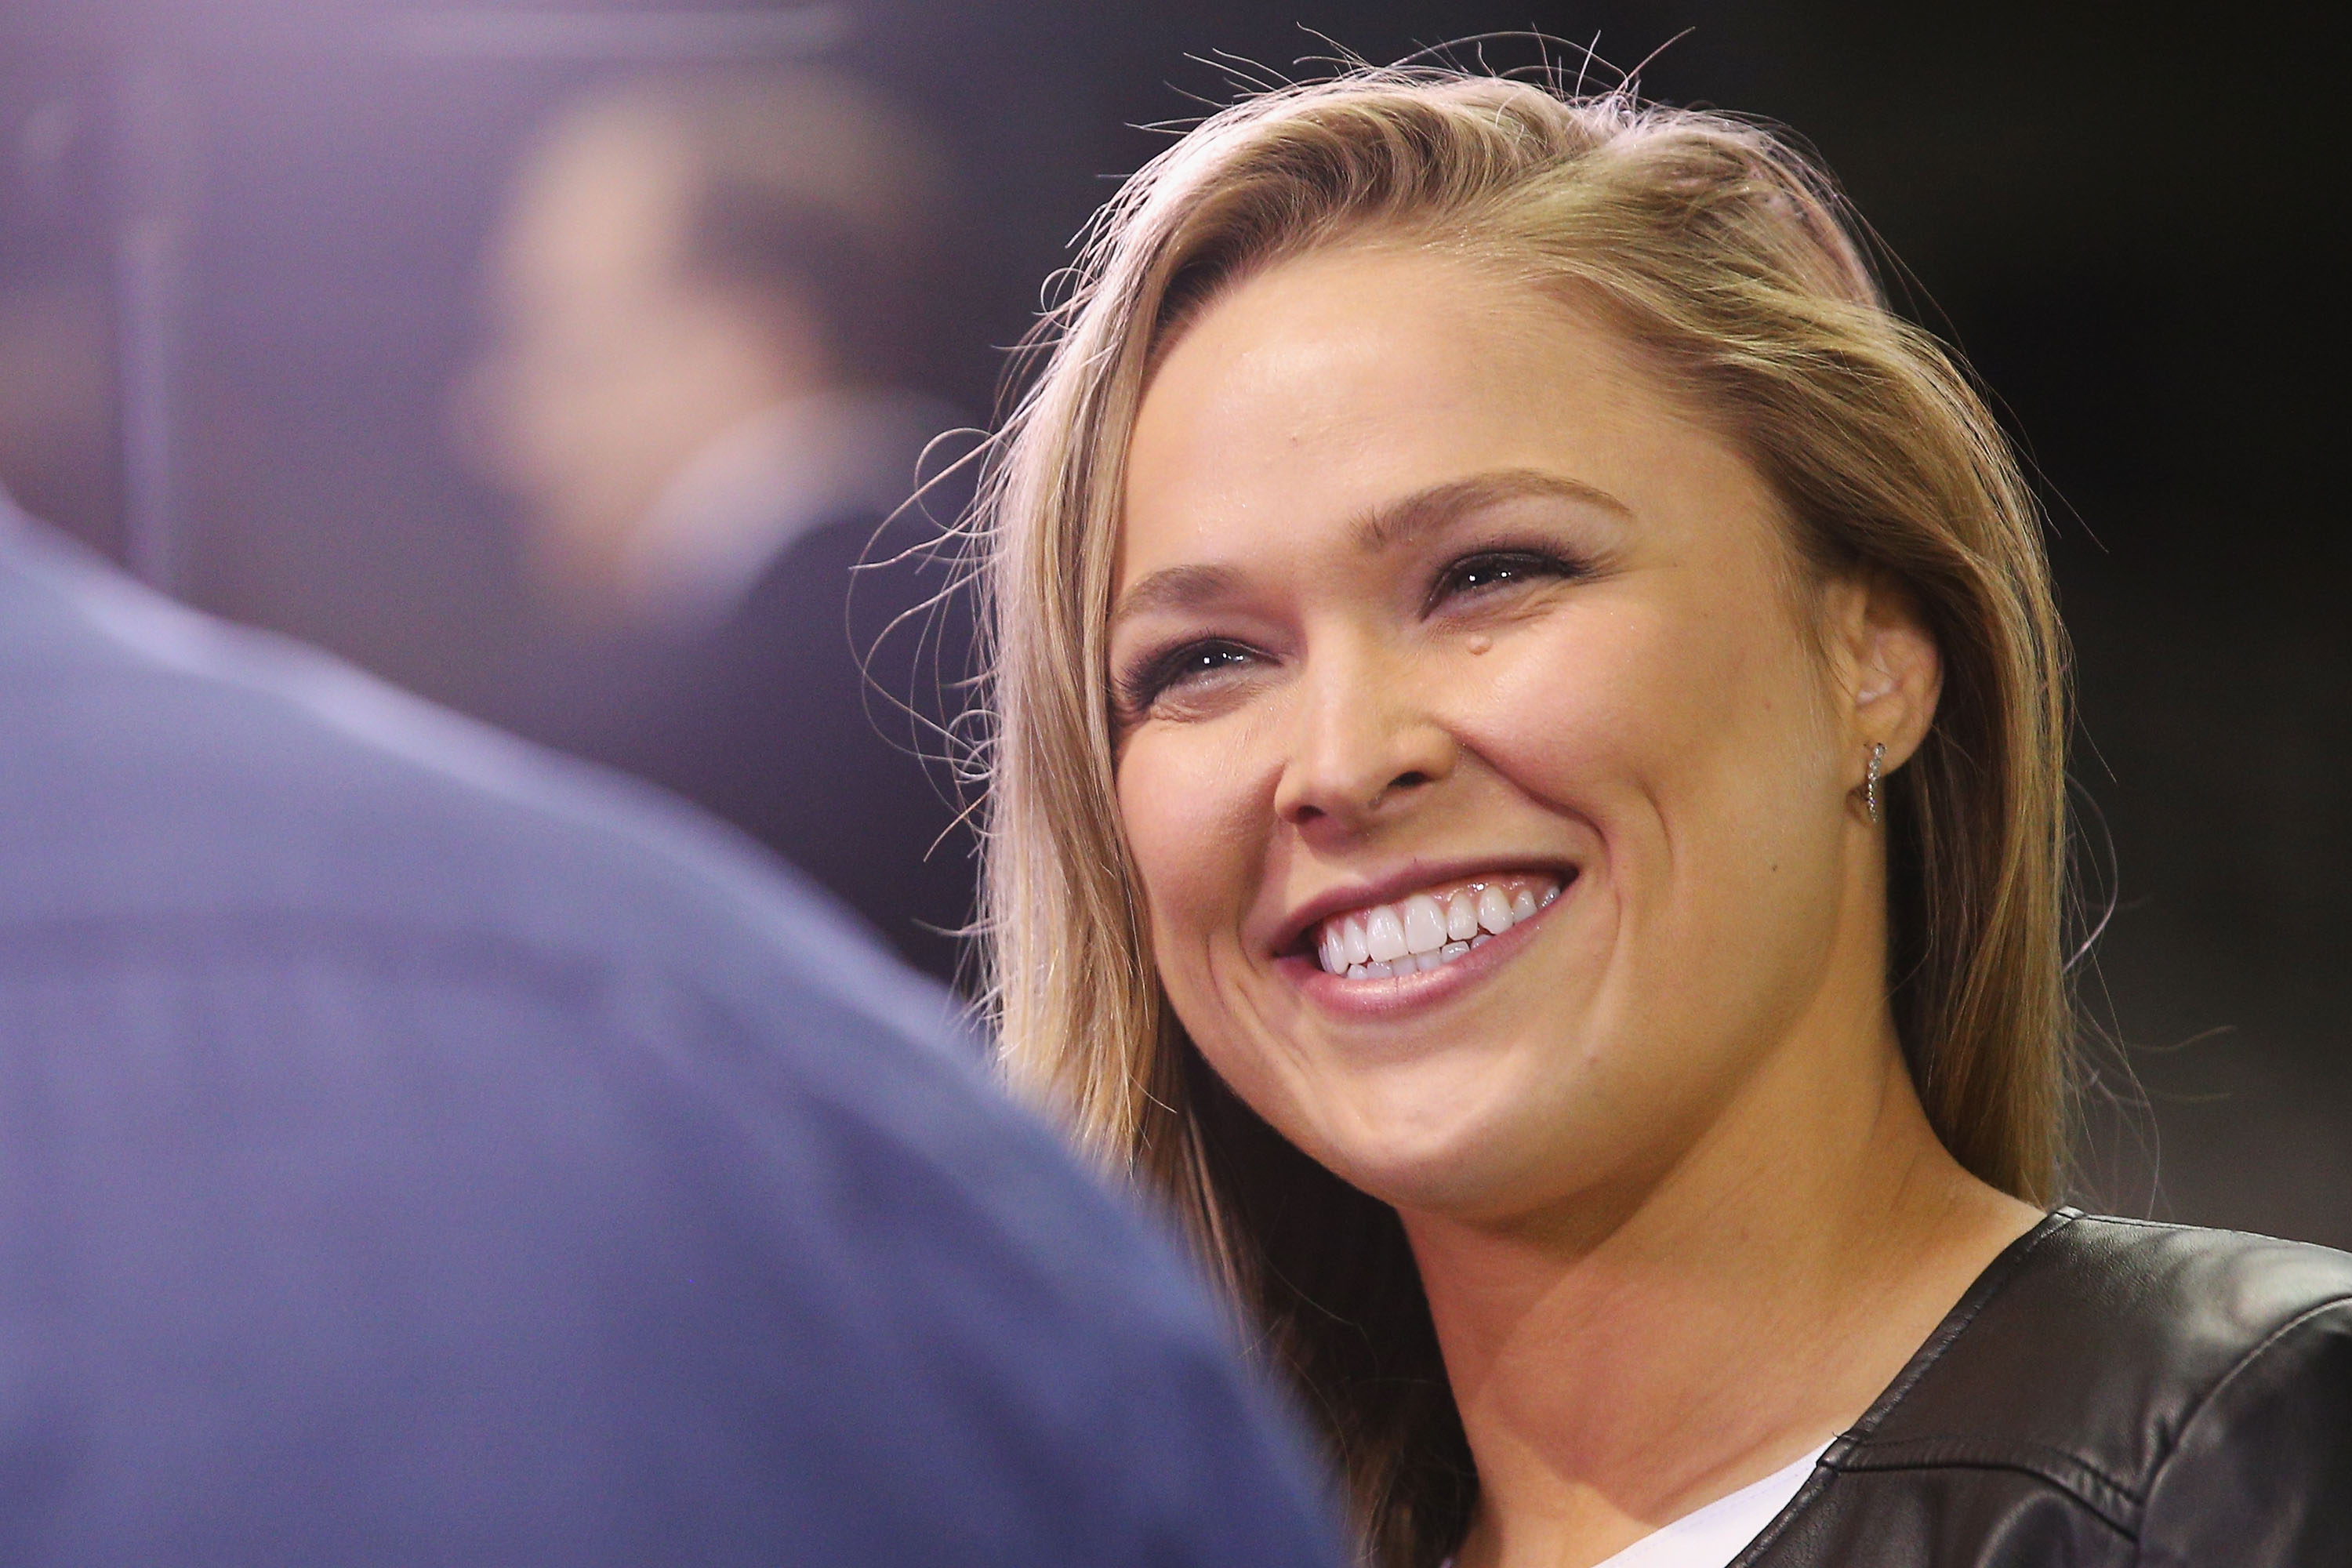 Ronda Rousey reacts during the UFC 193 media event at Etihad Stadium on September 16, 2015 in Melbourne, Australia.) (Michael Dodge—Getty Images)